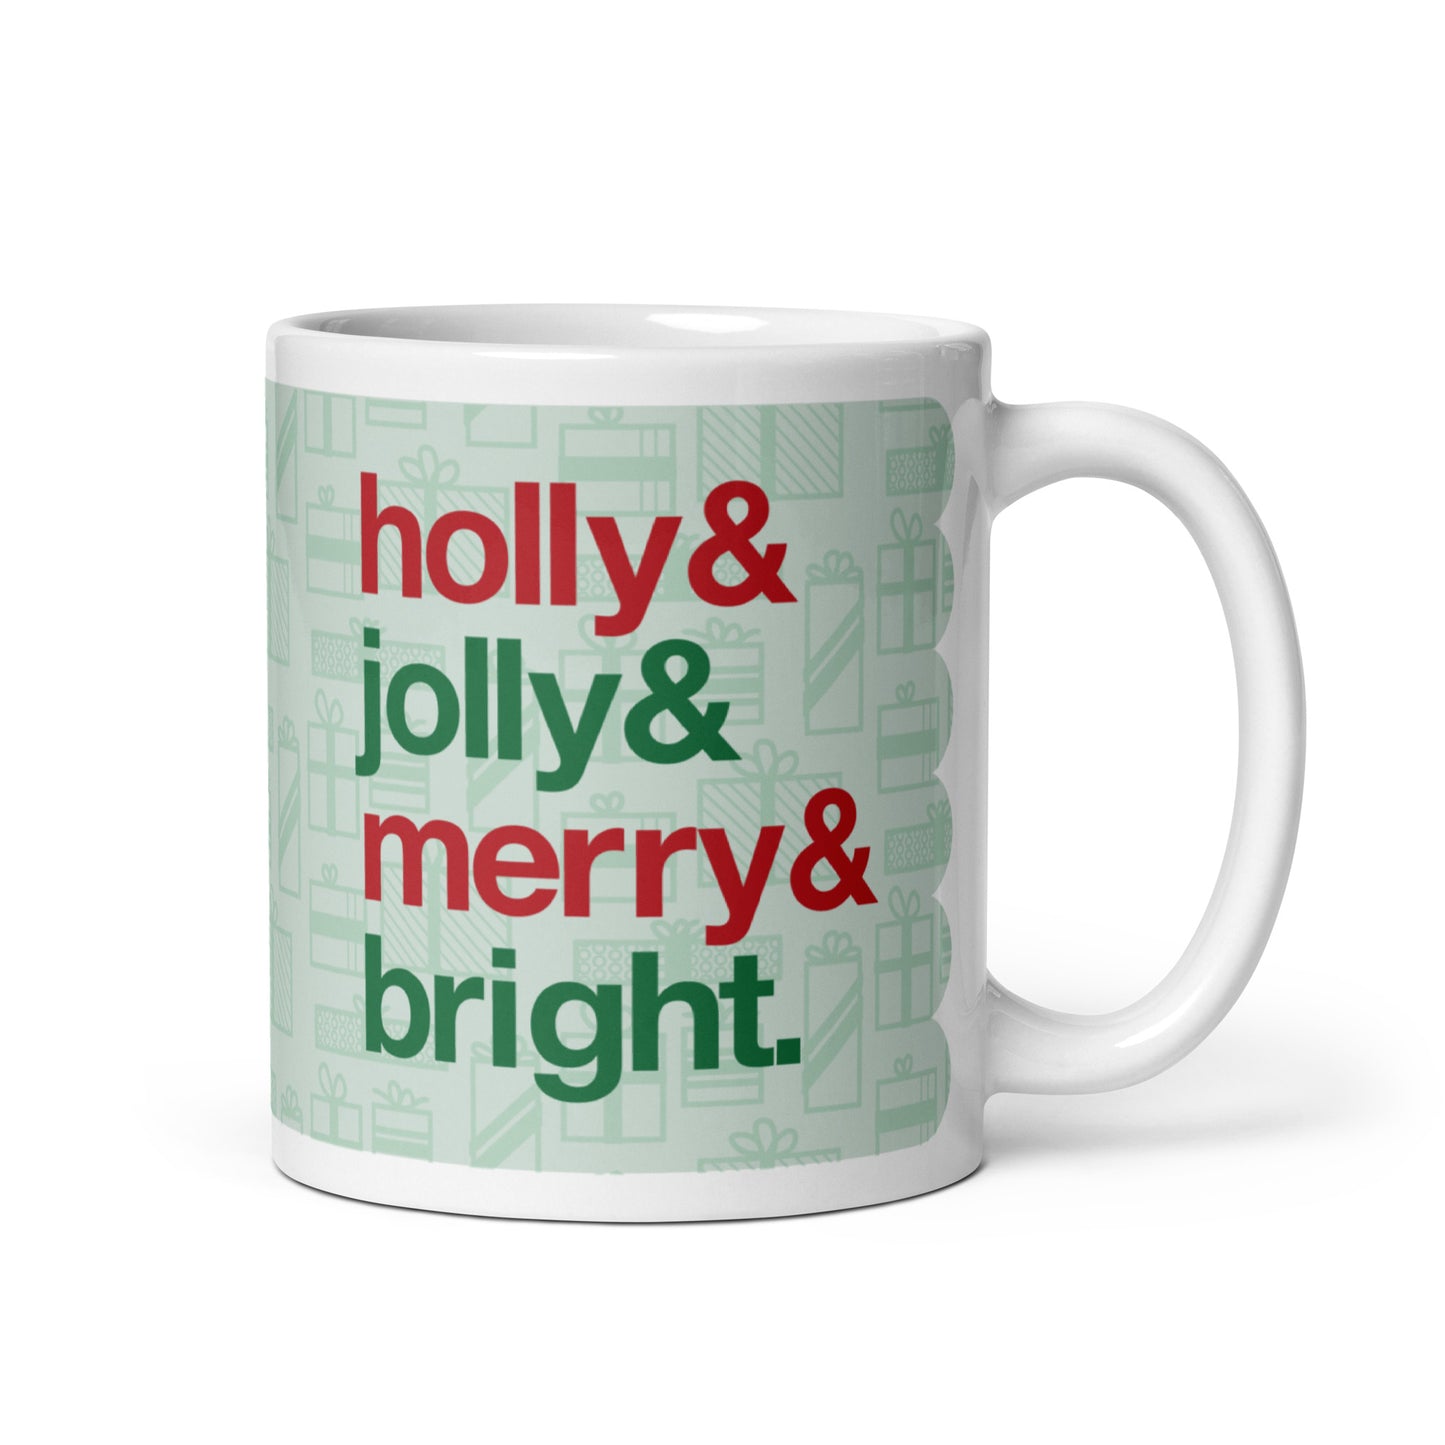 An 11 ounce ceramic mug with four lines of red and green text on a background pattern of light green presents of various sizes. The text on the mug reads "Holly & Jolly & Merry & Bright".